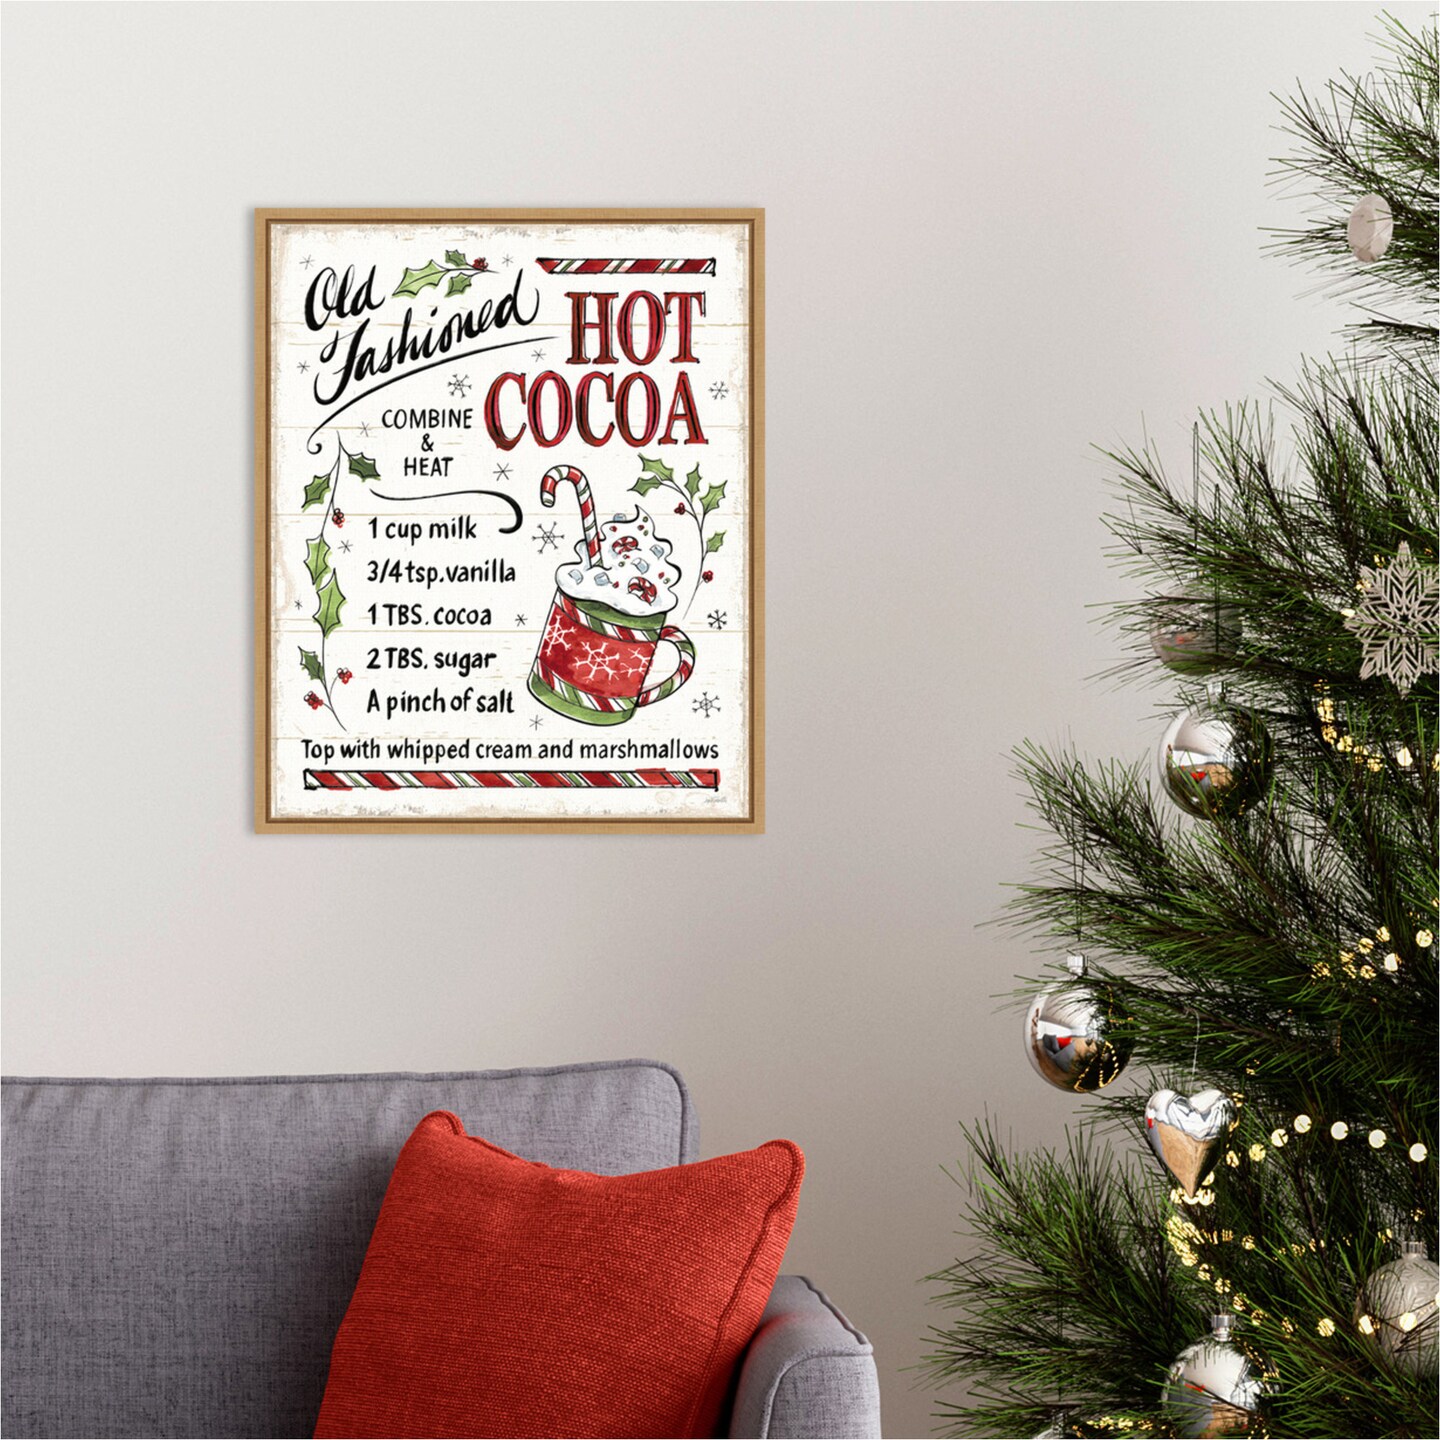 Christmas Treats VII by Anne Tavoletti 16-in. W x 20-in. H. Canvas Wall Art Print Framed in Natural